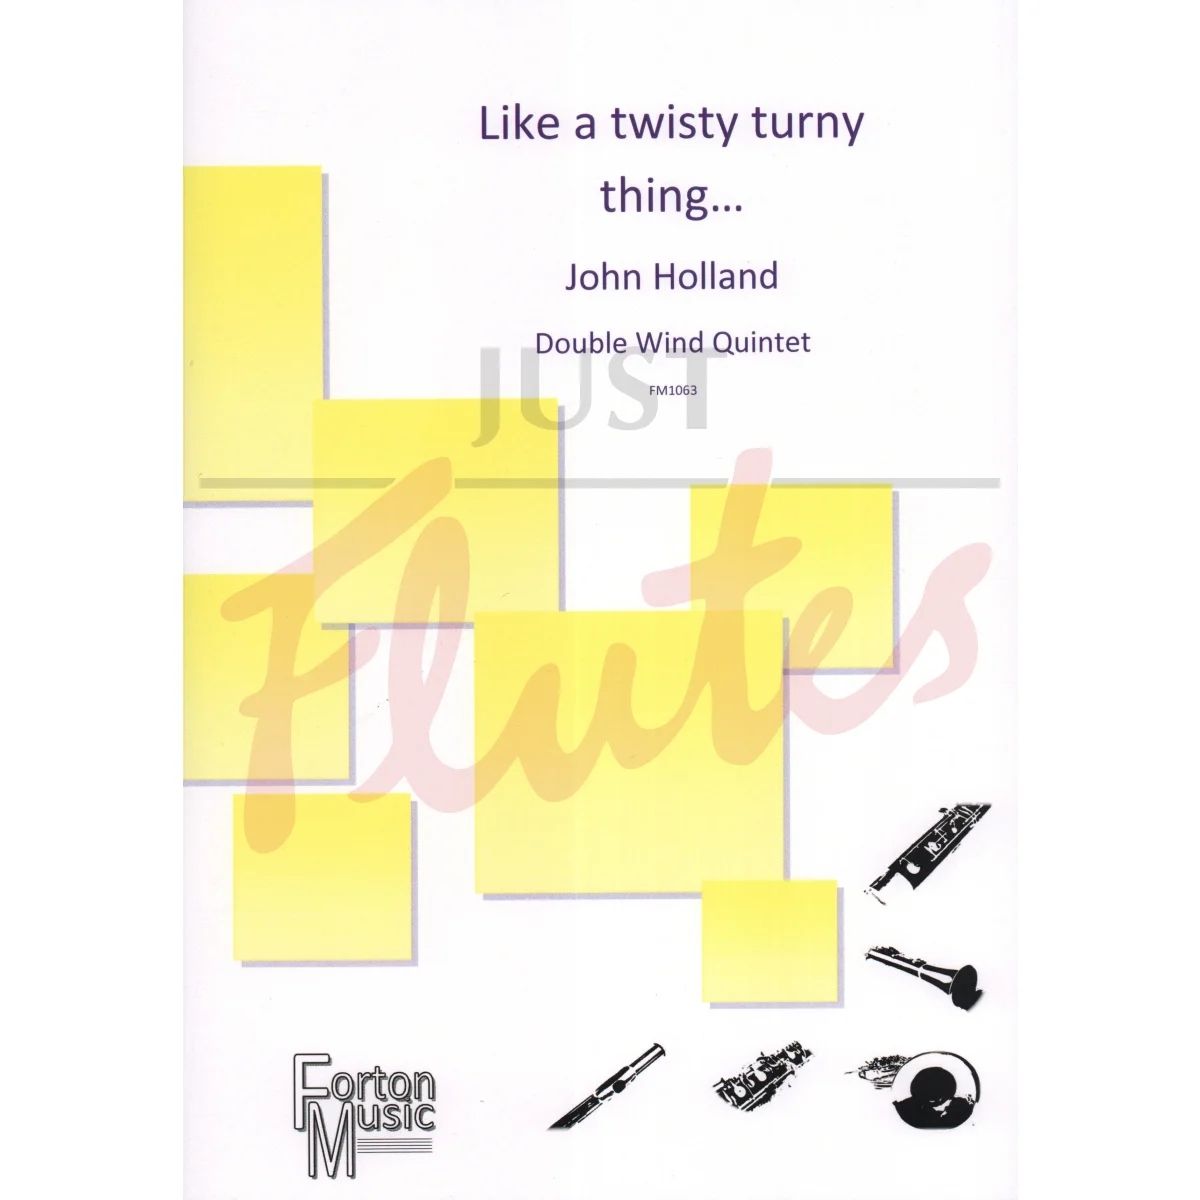 Like a Twisty, Turny Thing for Double Wind Quintet